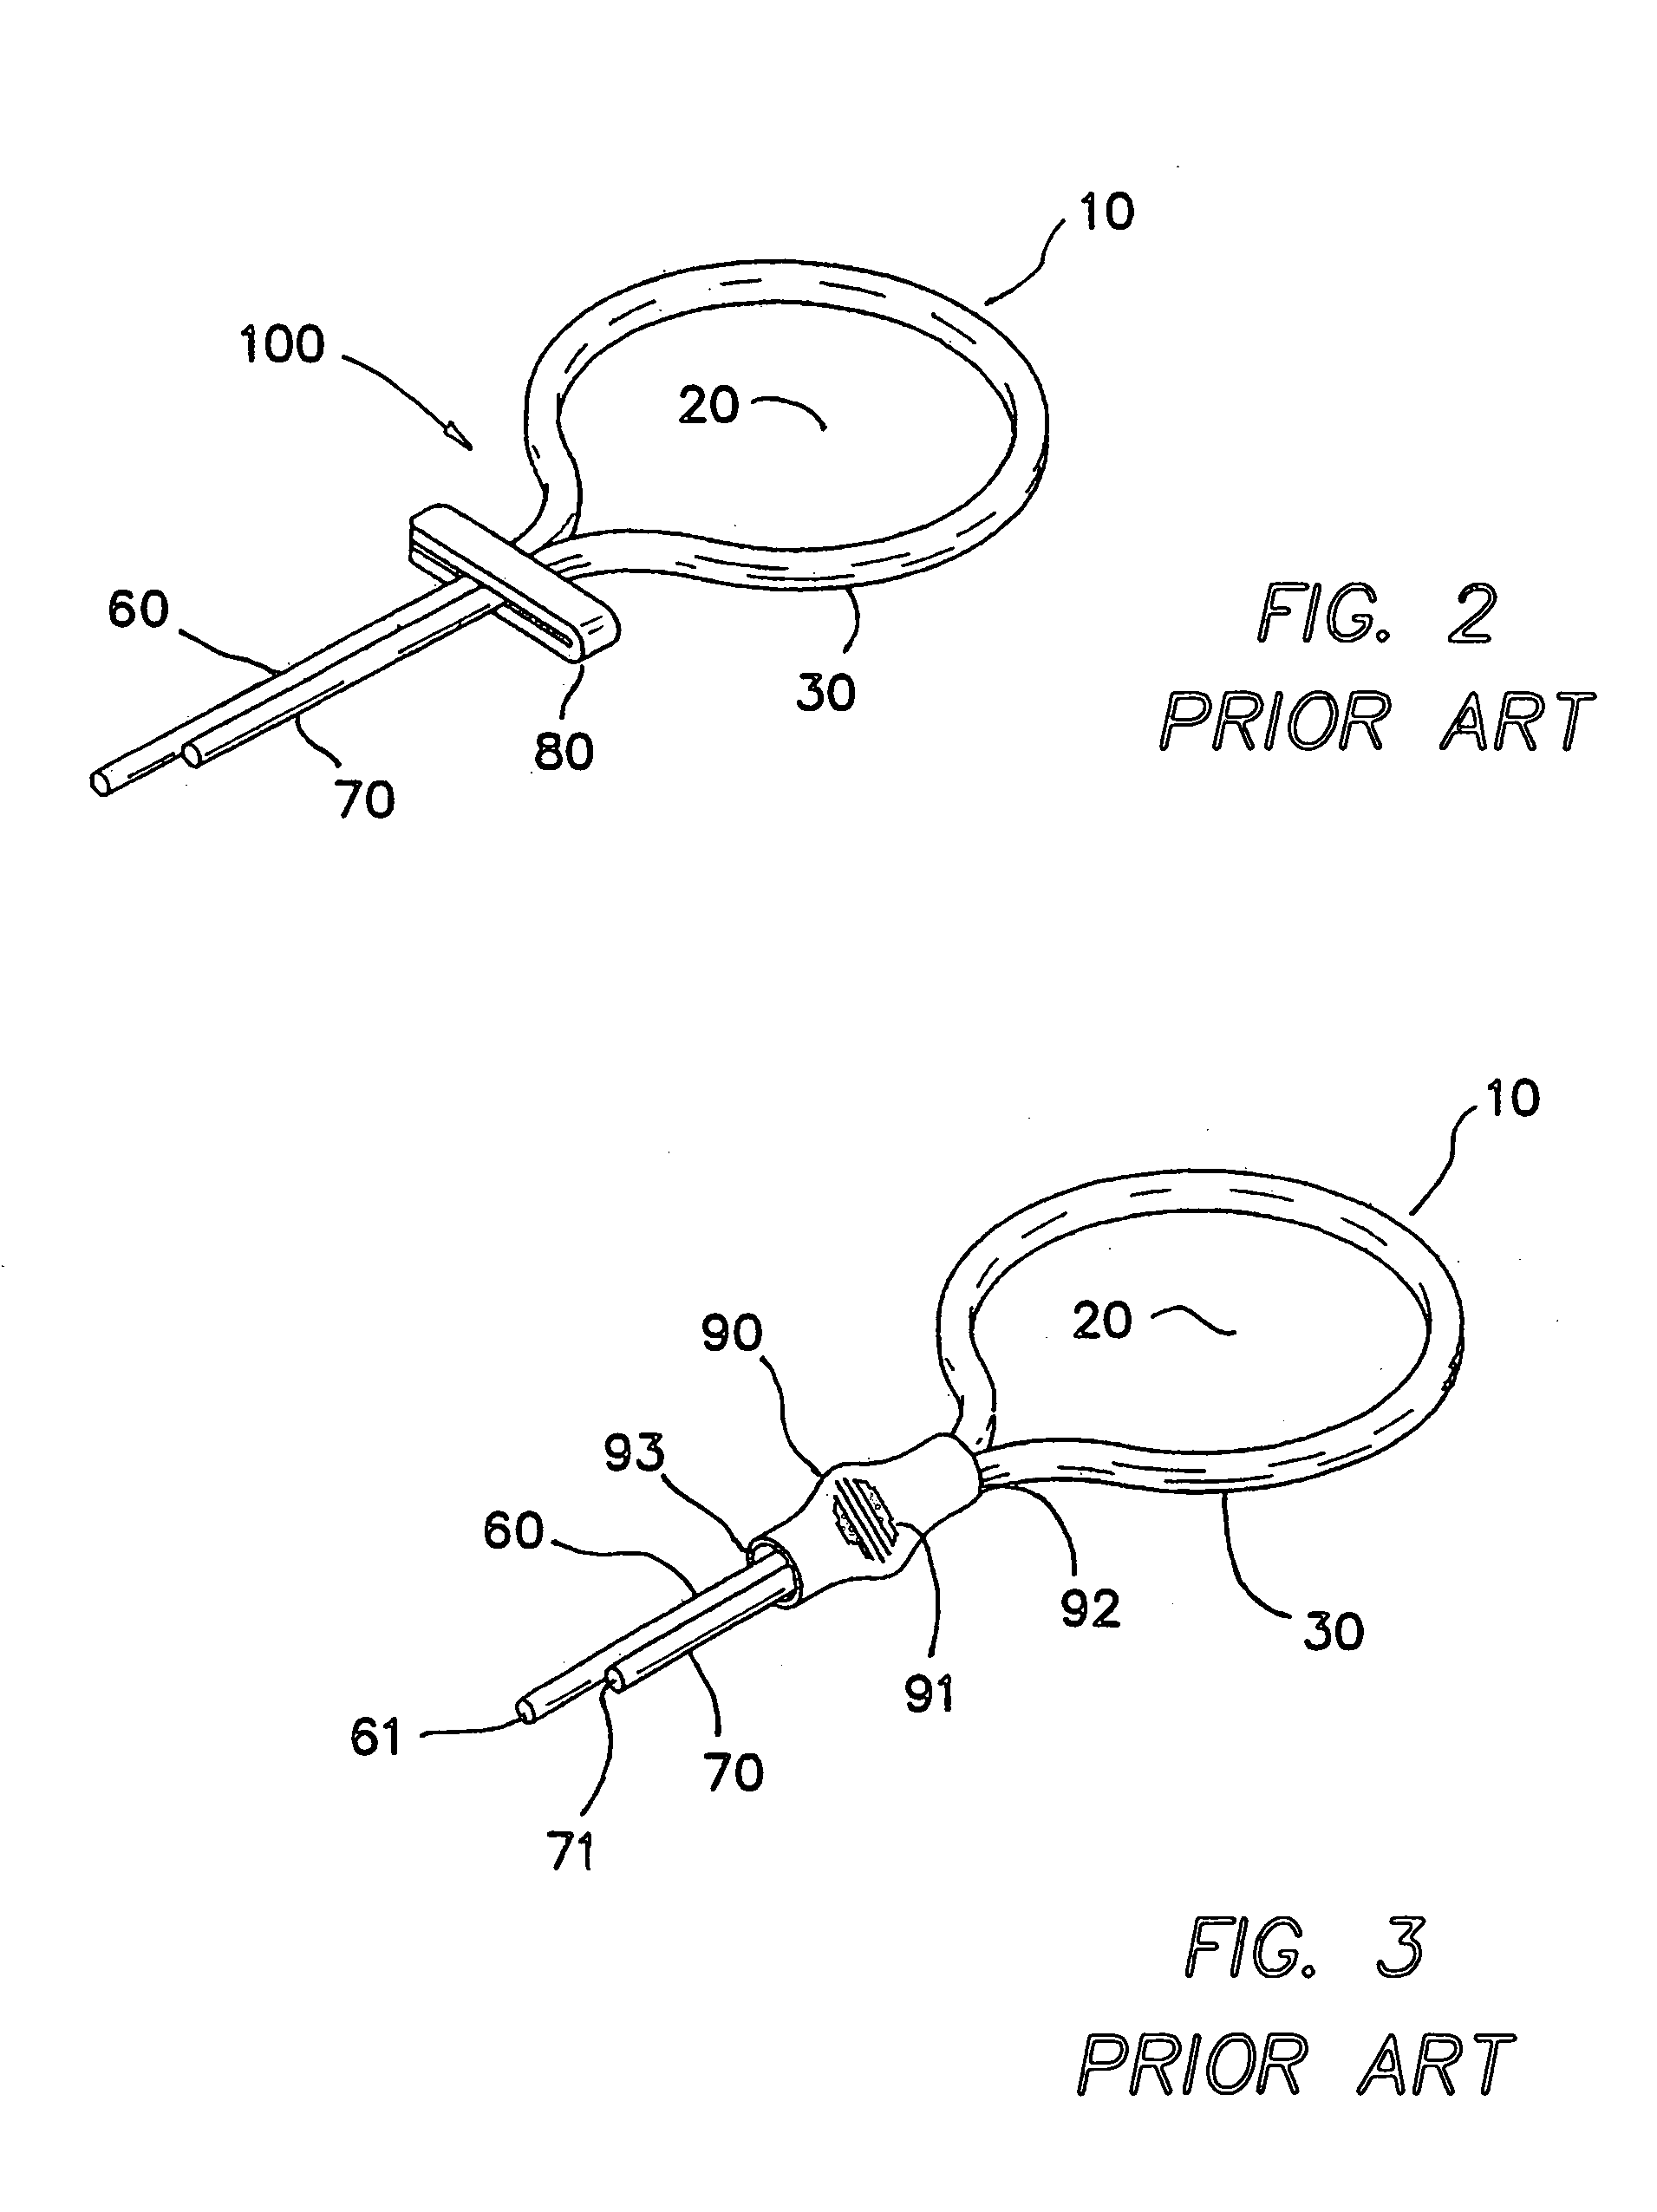 Suture securing device and method